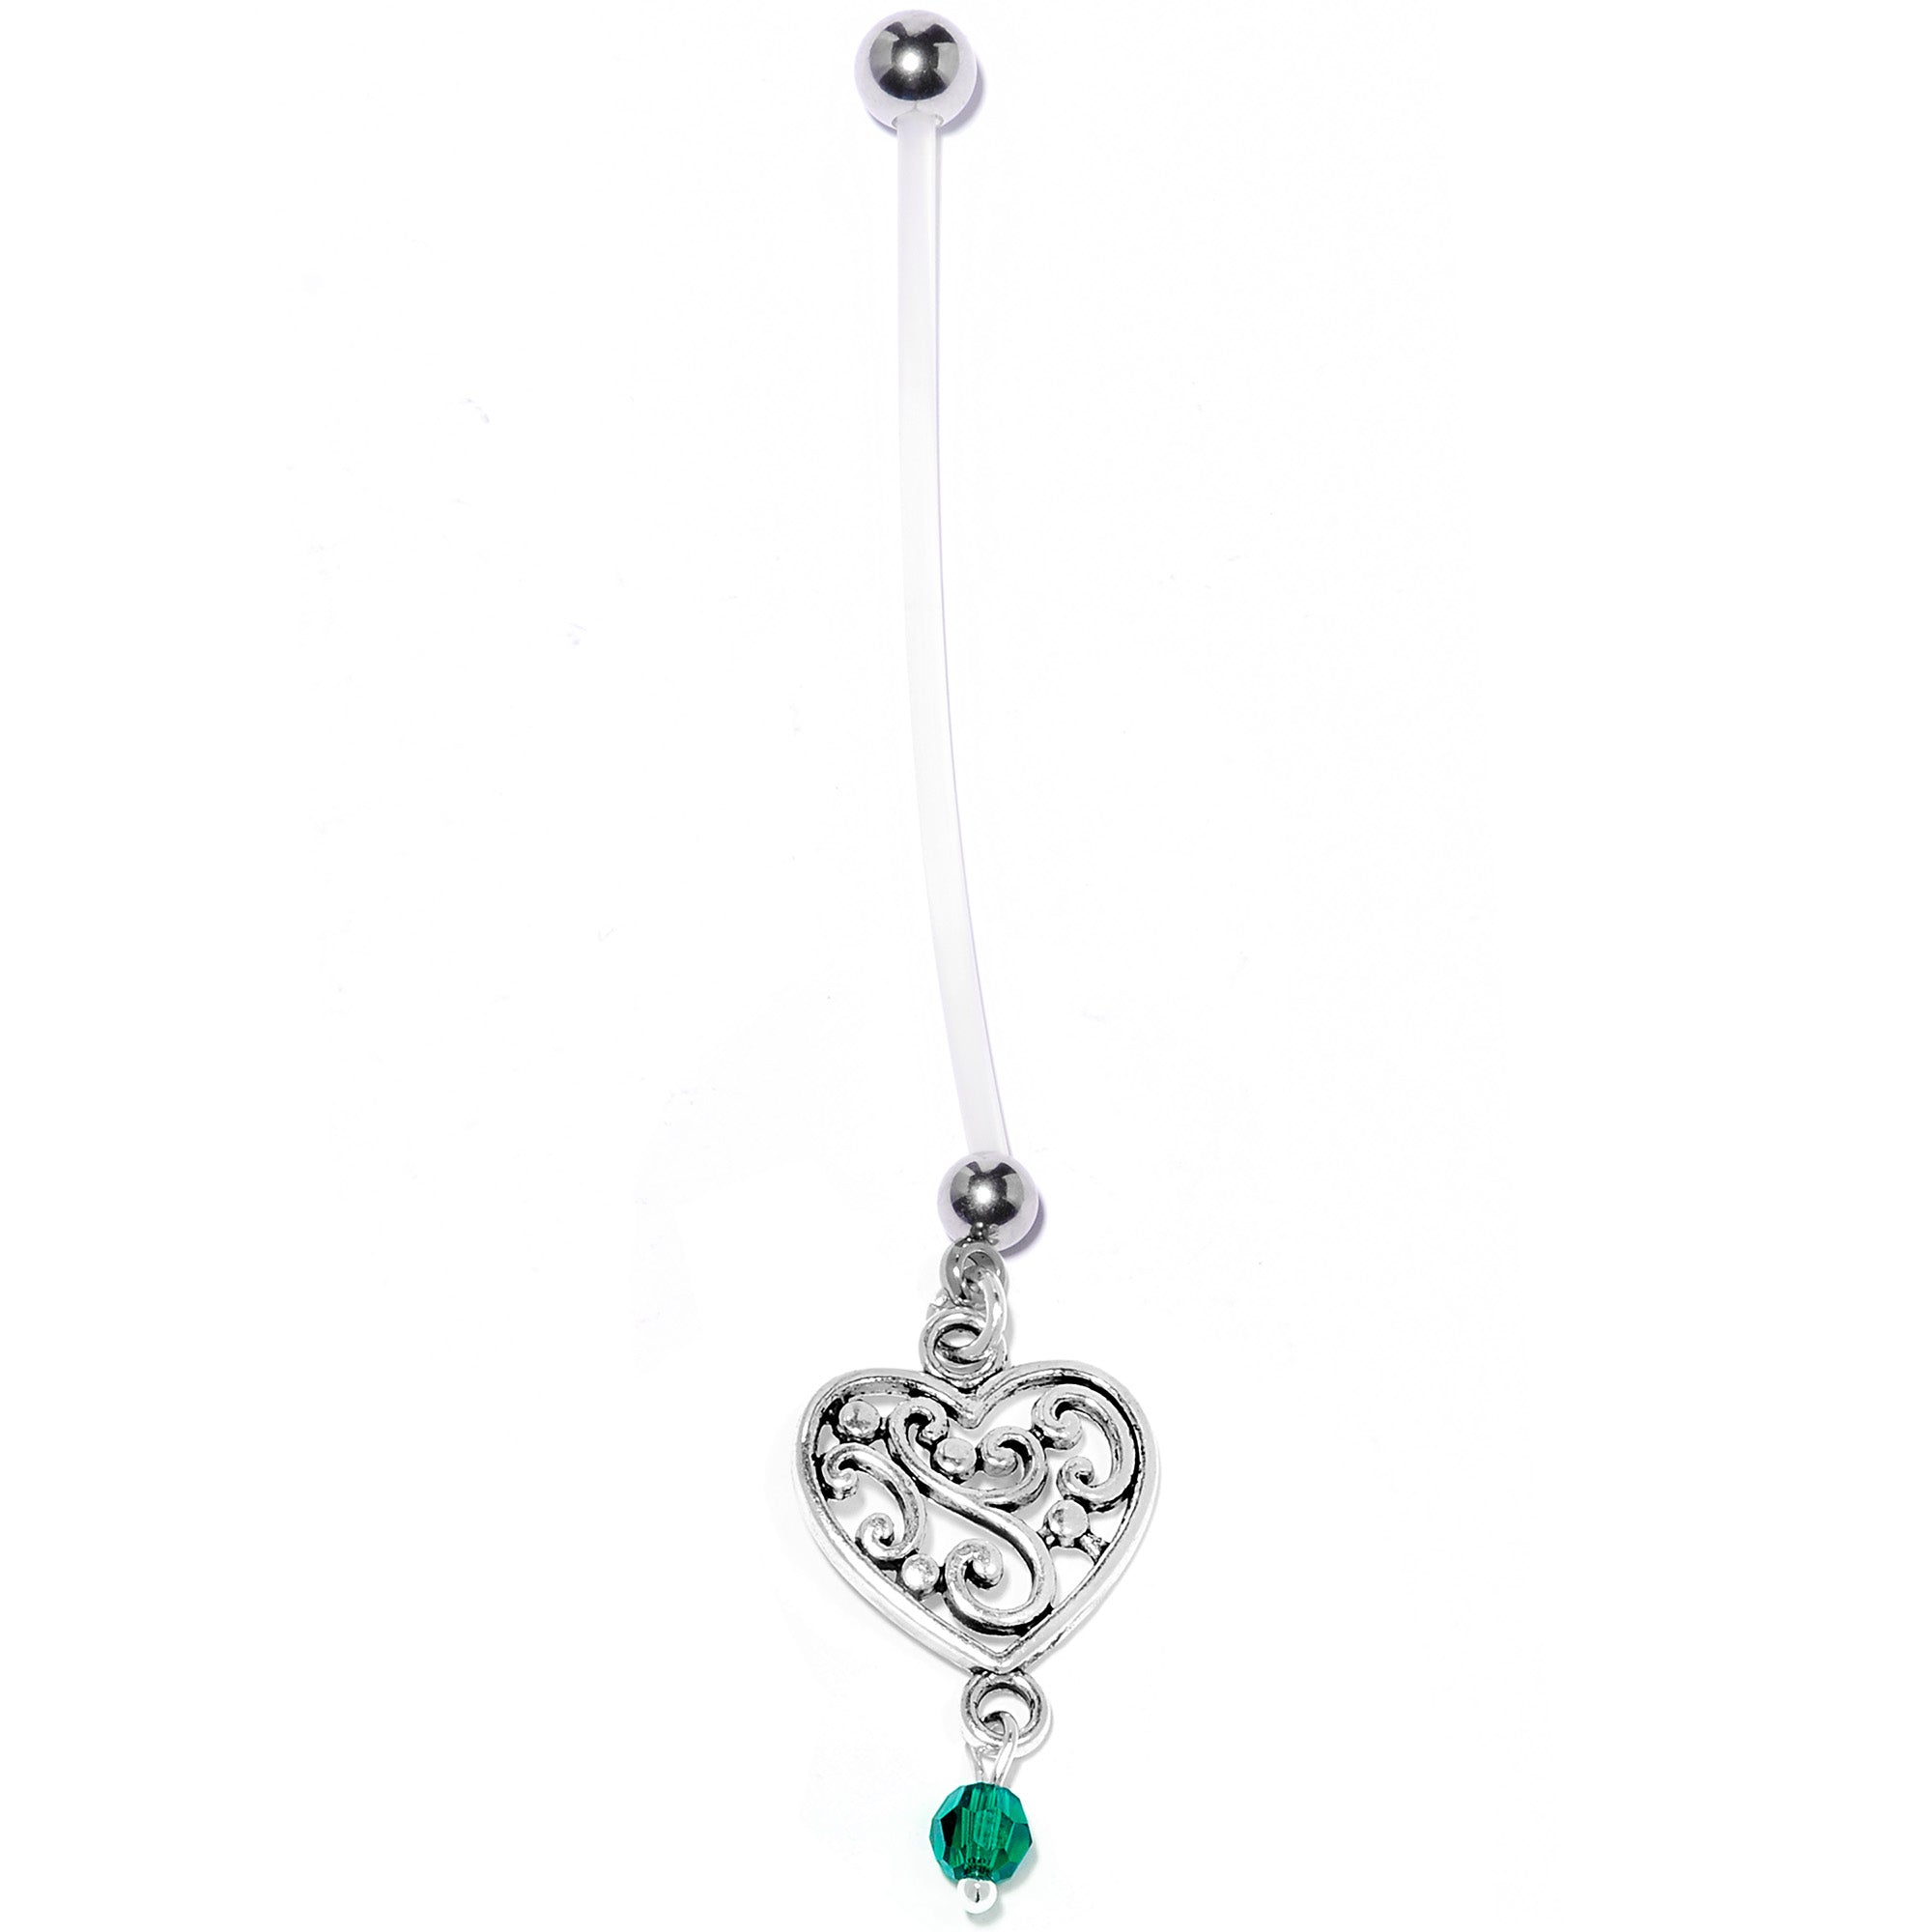 Handmade Heart Pregnancy Belly Ring Created with Crystals